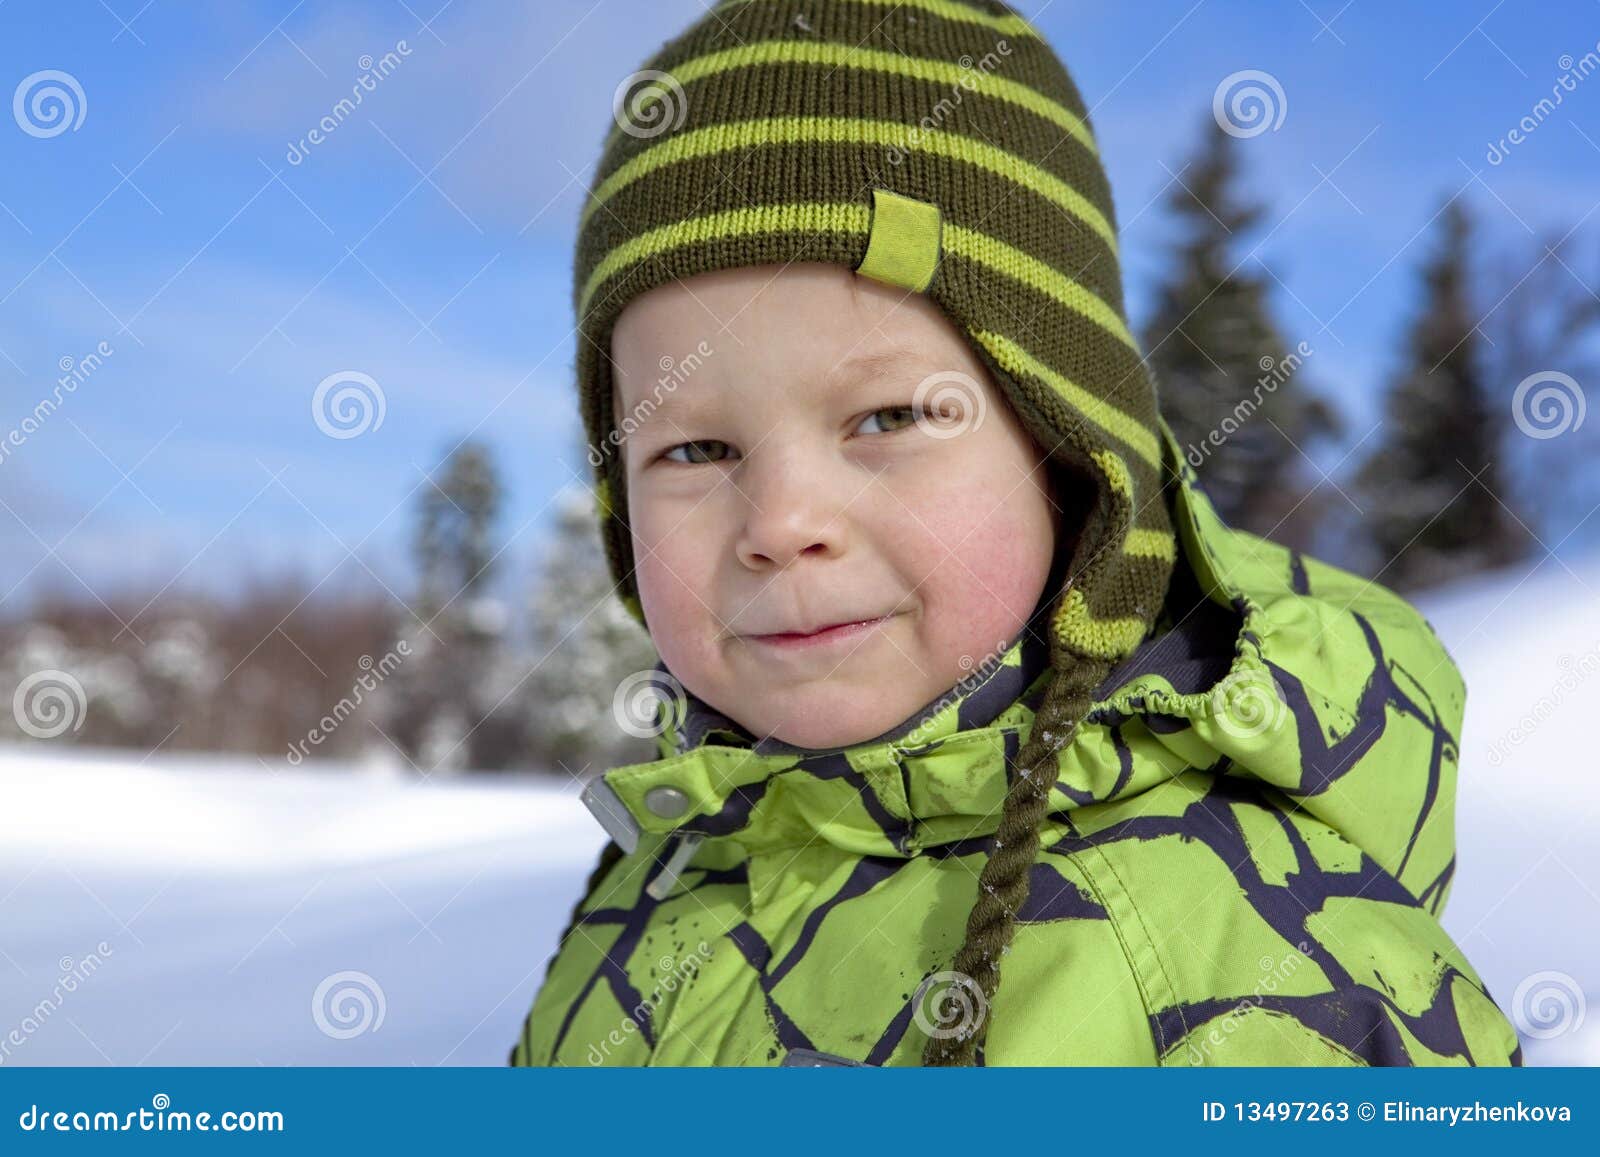 Boy In A Cold Winter Day Outdoors In Warm Clothes Stock Photo, Picture and  Royalty Free Image. Image 25442133.